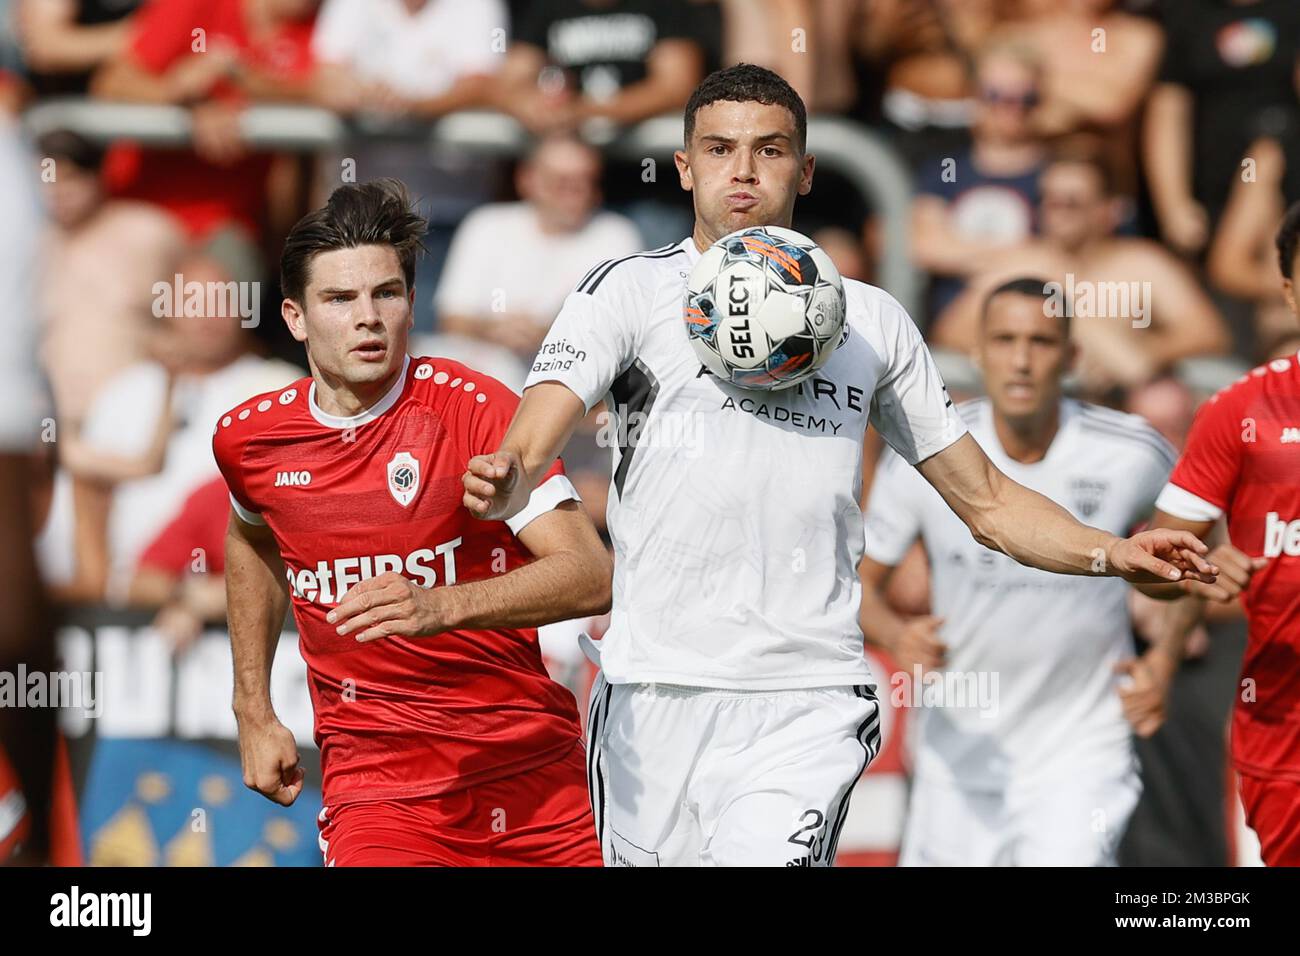 Antwerp's Jurgen Peter Ekkelenkamp and Eupen's Isaac Christie-Davies fight for the ball during a soccer match between KAS Eupen and Royal Antwerp FC RAFC, Sunday 14 August 2022 in Eupen, on day 4 of the 2022-2023 'Jupiler Pro League' first division of the Belgian championship. BELGA PHOTO BRUNO FAHY Stock Photo